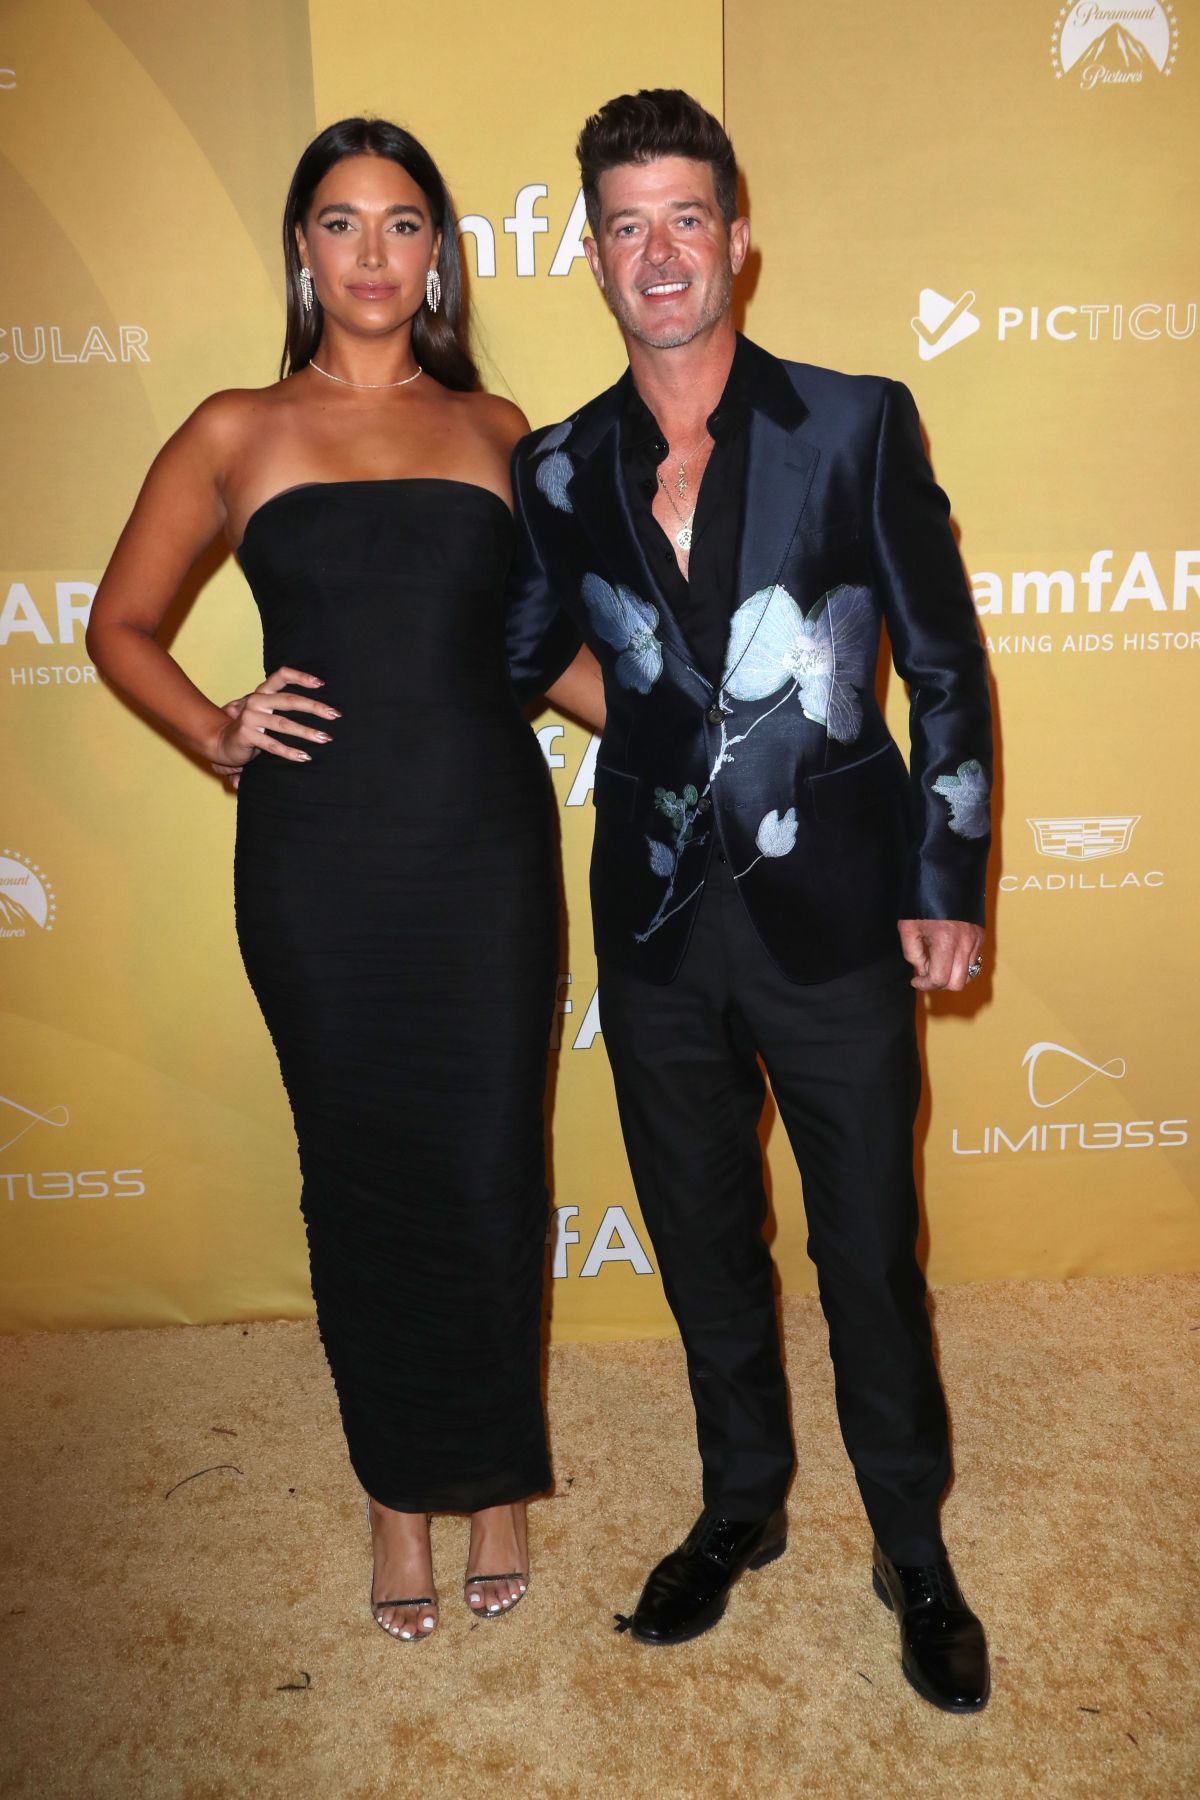 April Love Geary and Robin Thicke attends amfAR Gala Los Angeles 2022 in West Hollywood